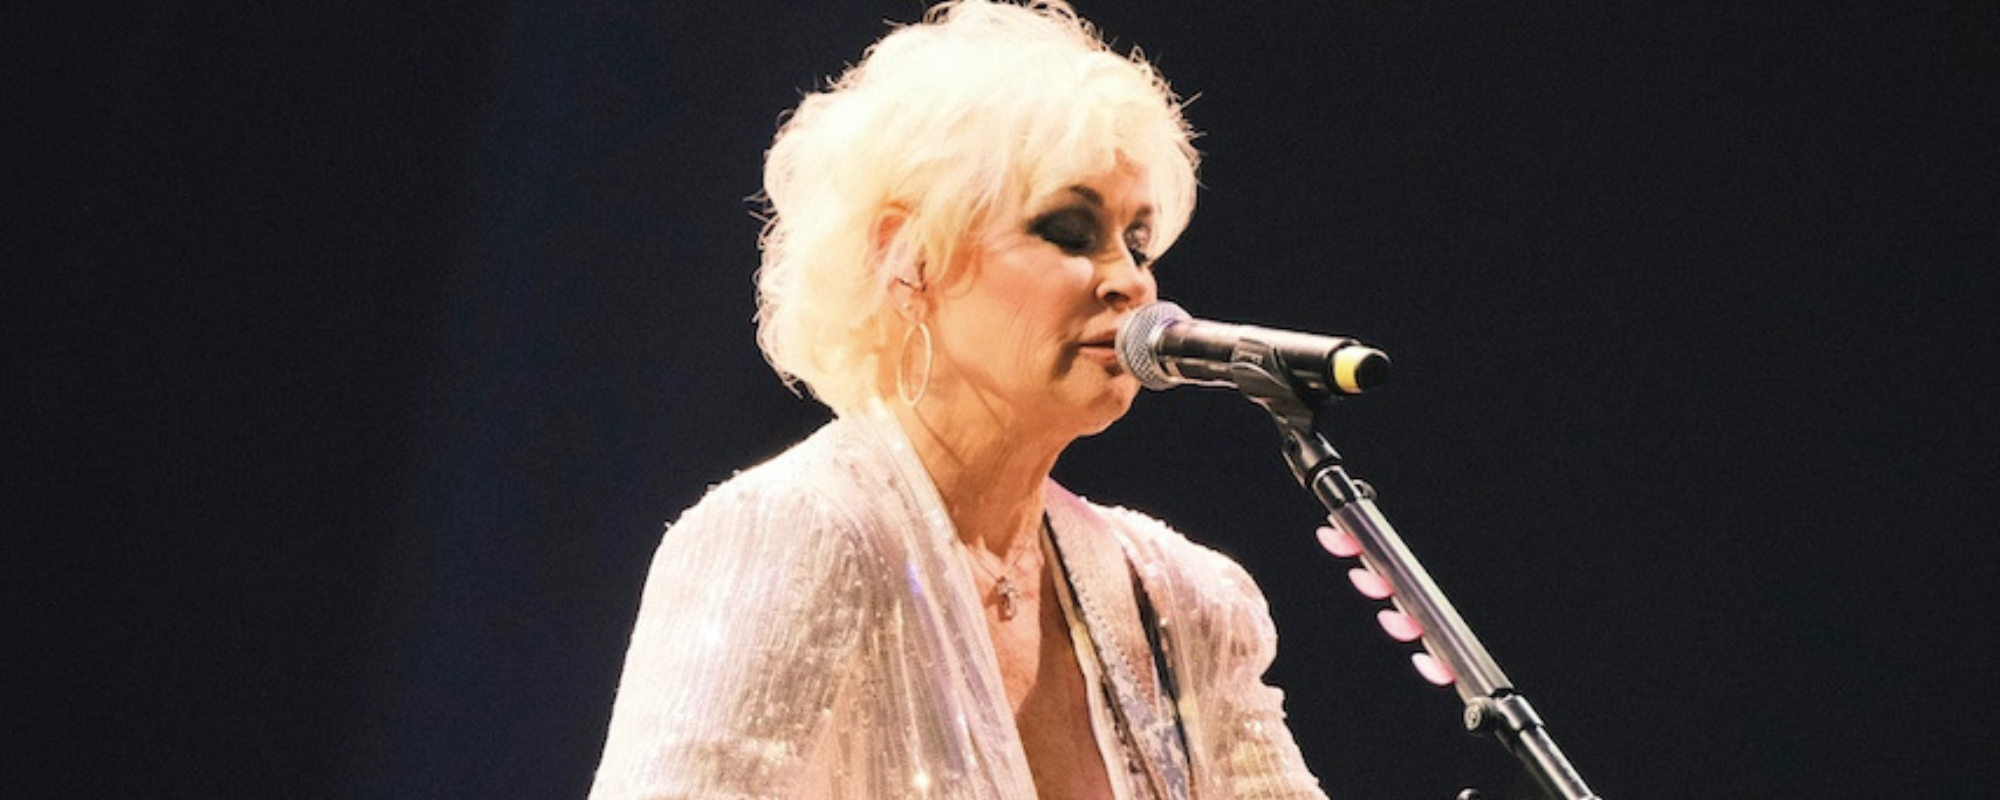 Watch: Lorrie Morgan Pays Tribute to Her Late Husband Keith Whitley on the Grand Ole Opry with “When You Say Nothing at All”